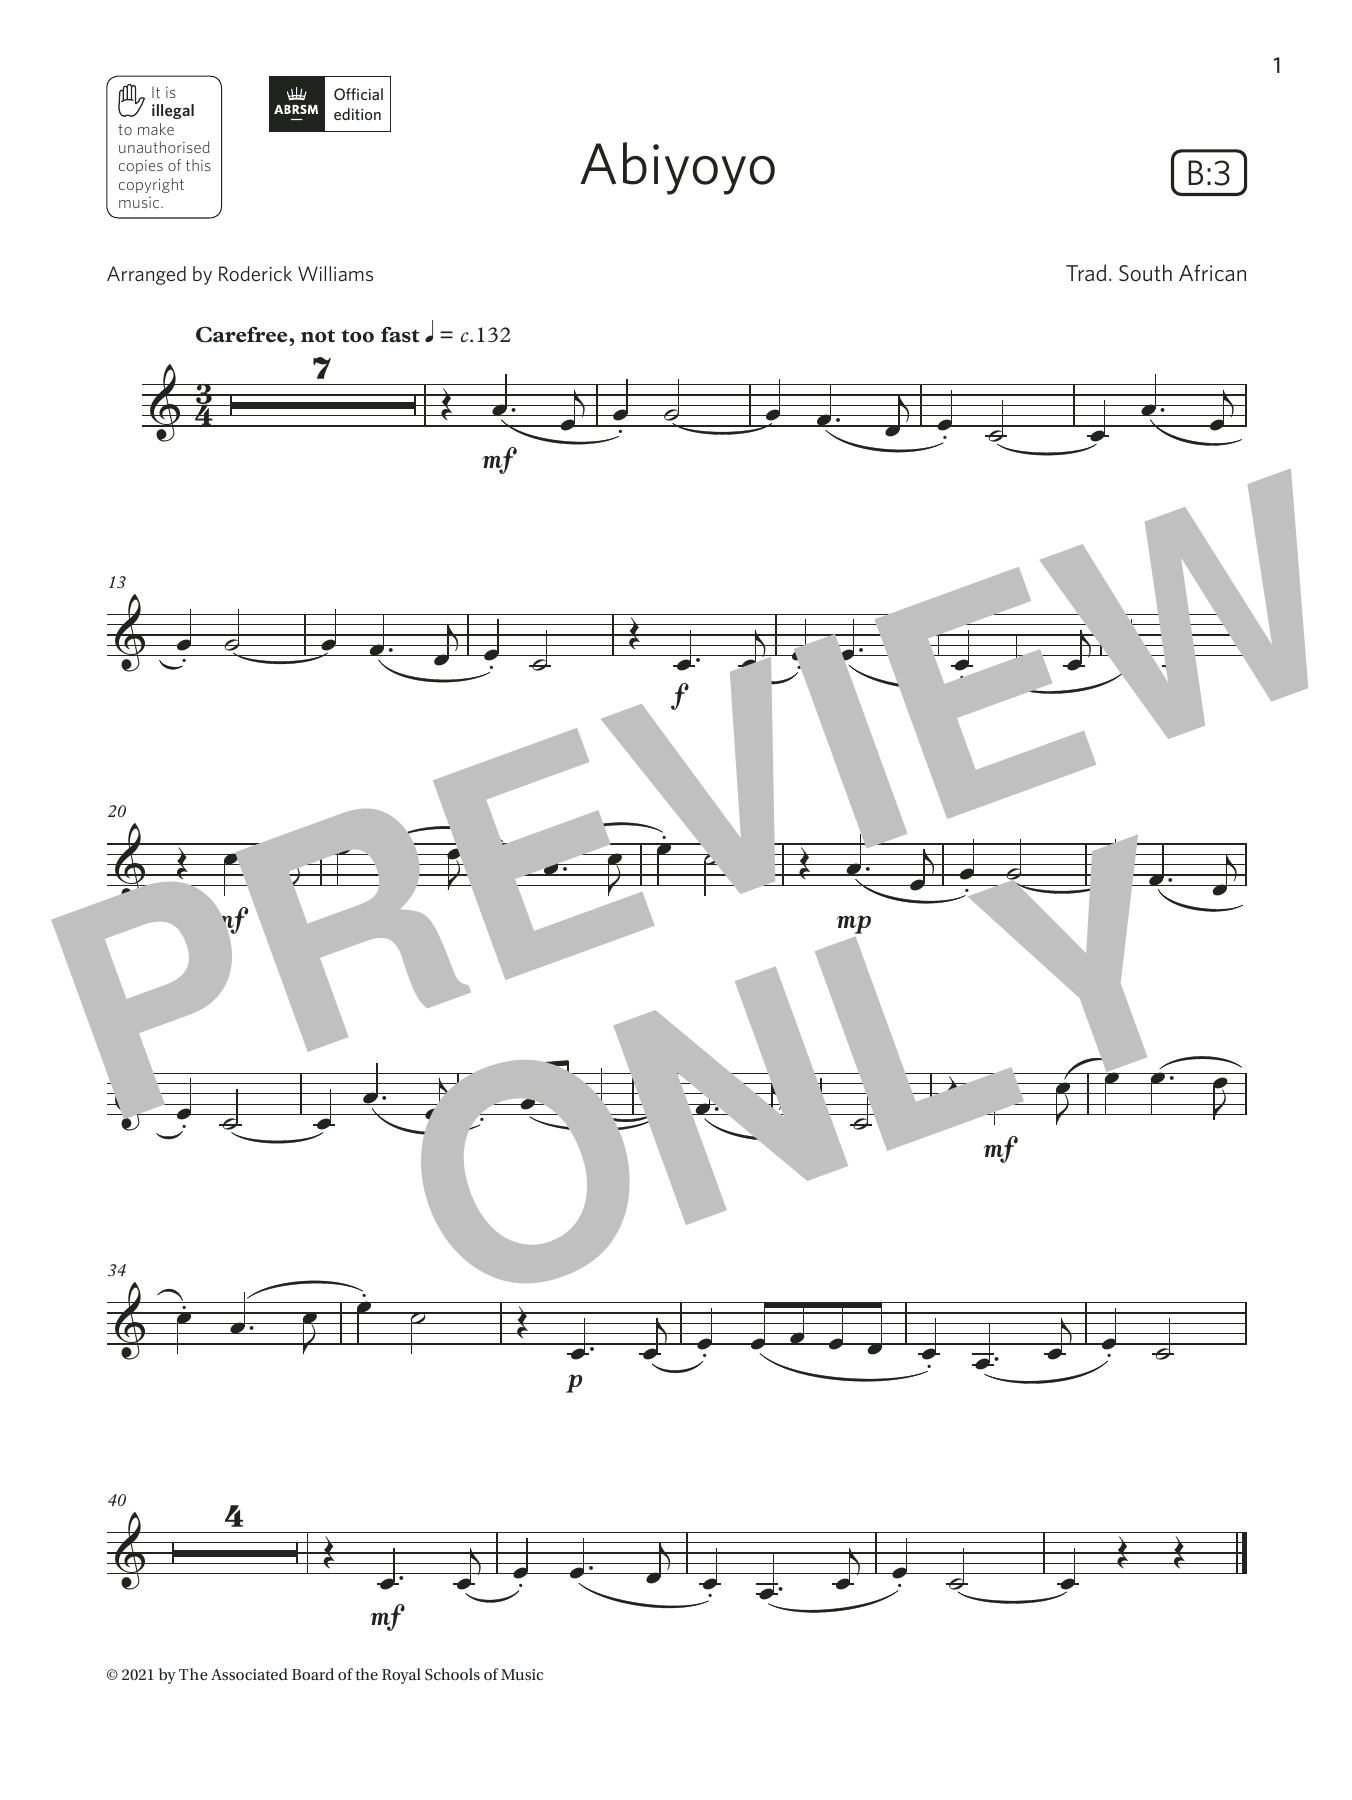 Download Trad. South African Abiyoyo (Grade 2 List B3 from the ABRS Sheet Music